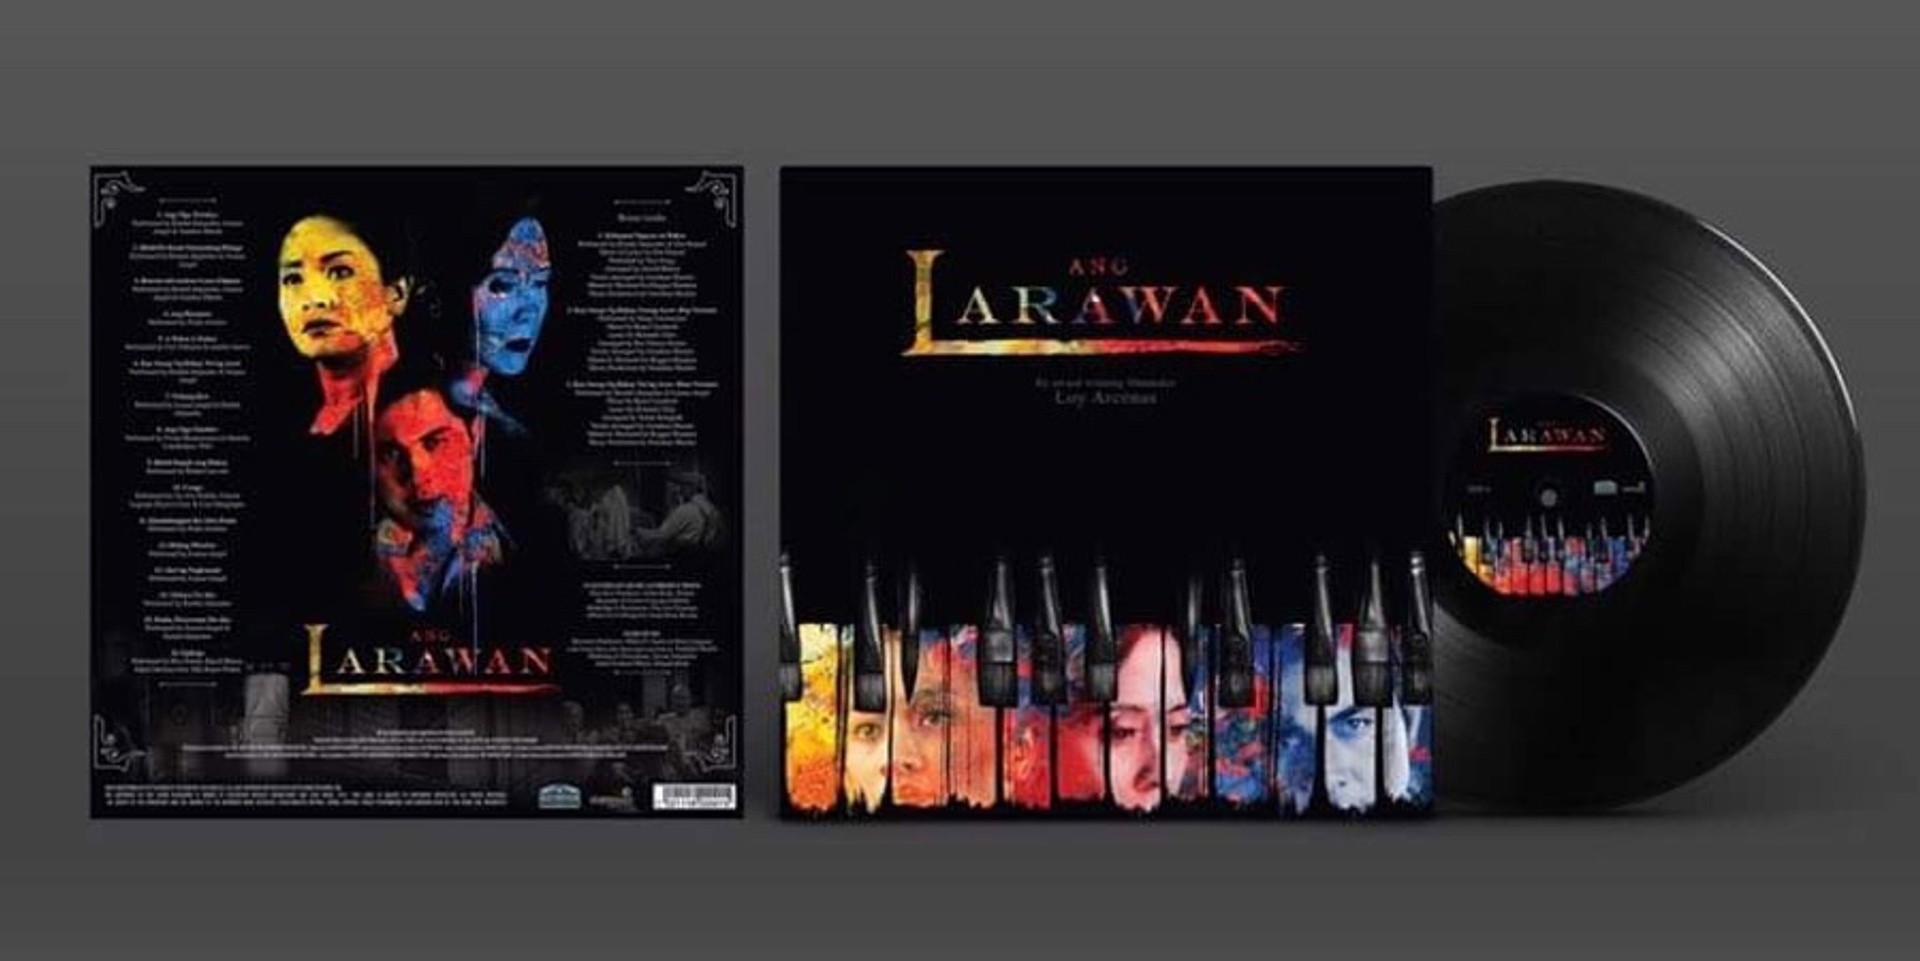 Ang Larawan Original Soundtrack released on limited edition vinyl